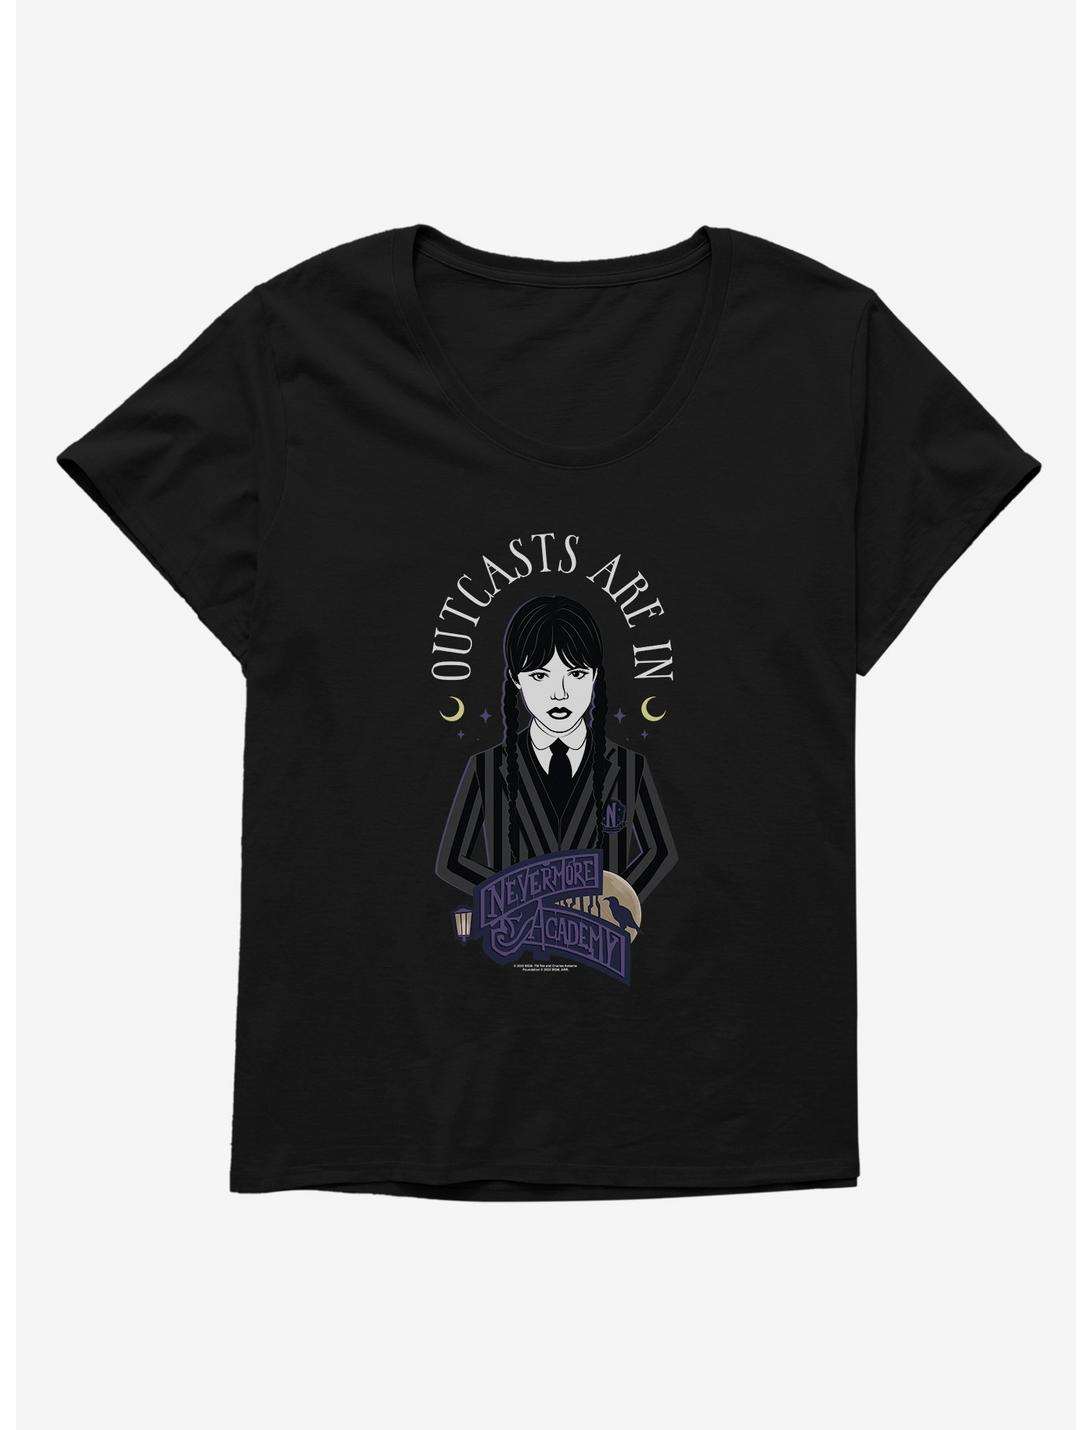 Wednesday Outcasts Are In Womens T-Shirt Plus Size, BLACK, hi-res